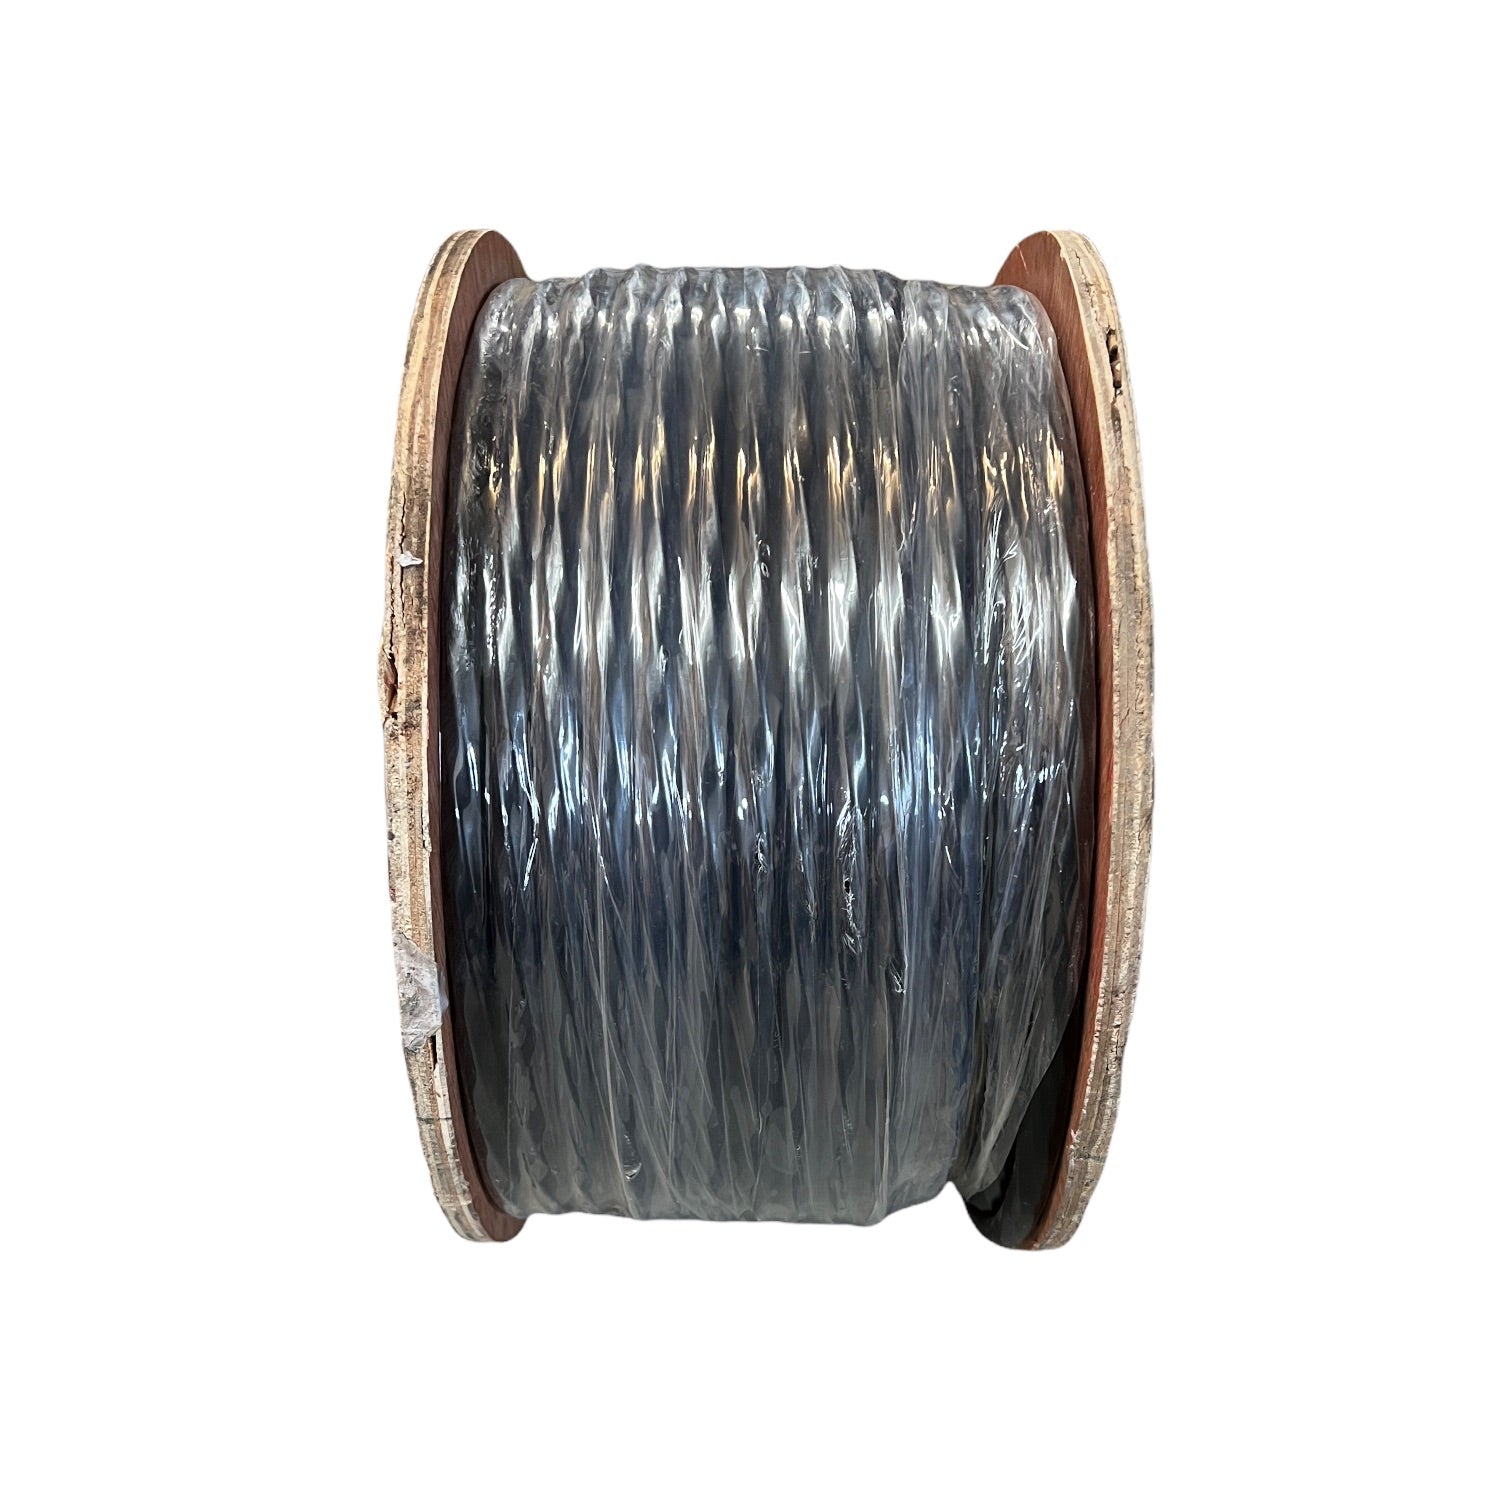 18/8X1000 - Multi-Conductor Irrigation Control Wire, 18 awg, 18/8 X 1000 ft